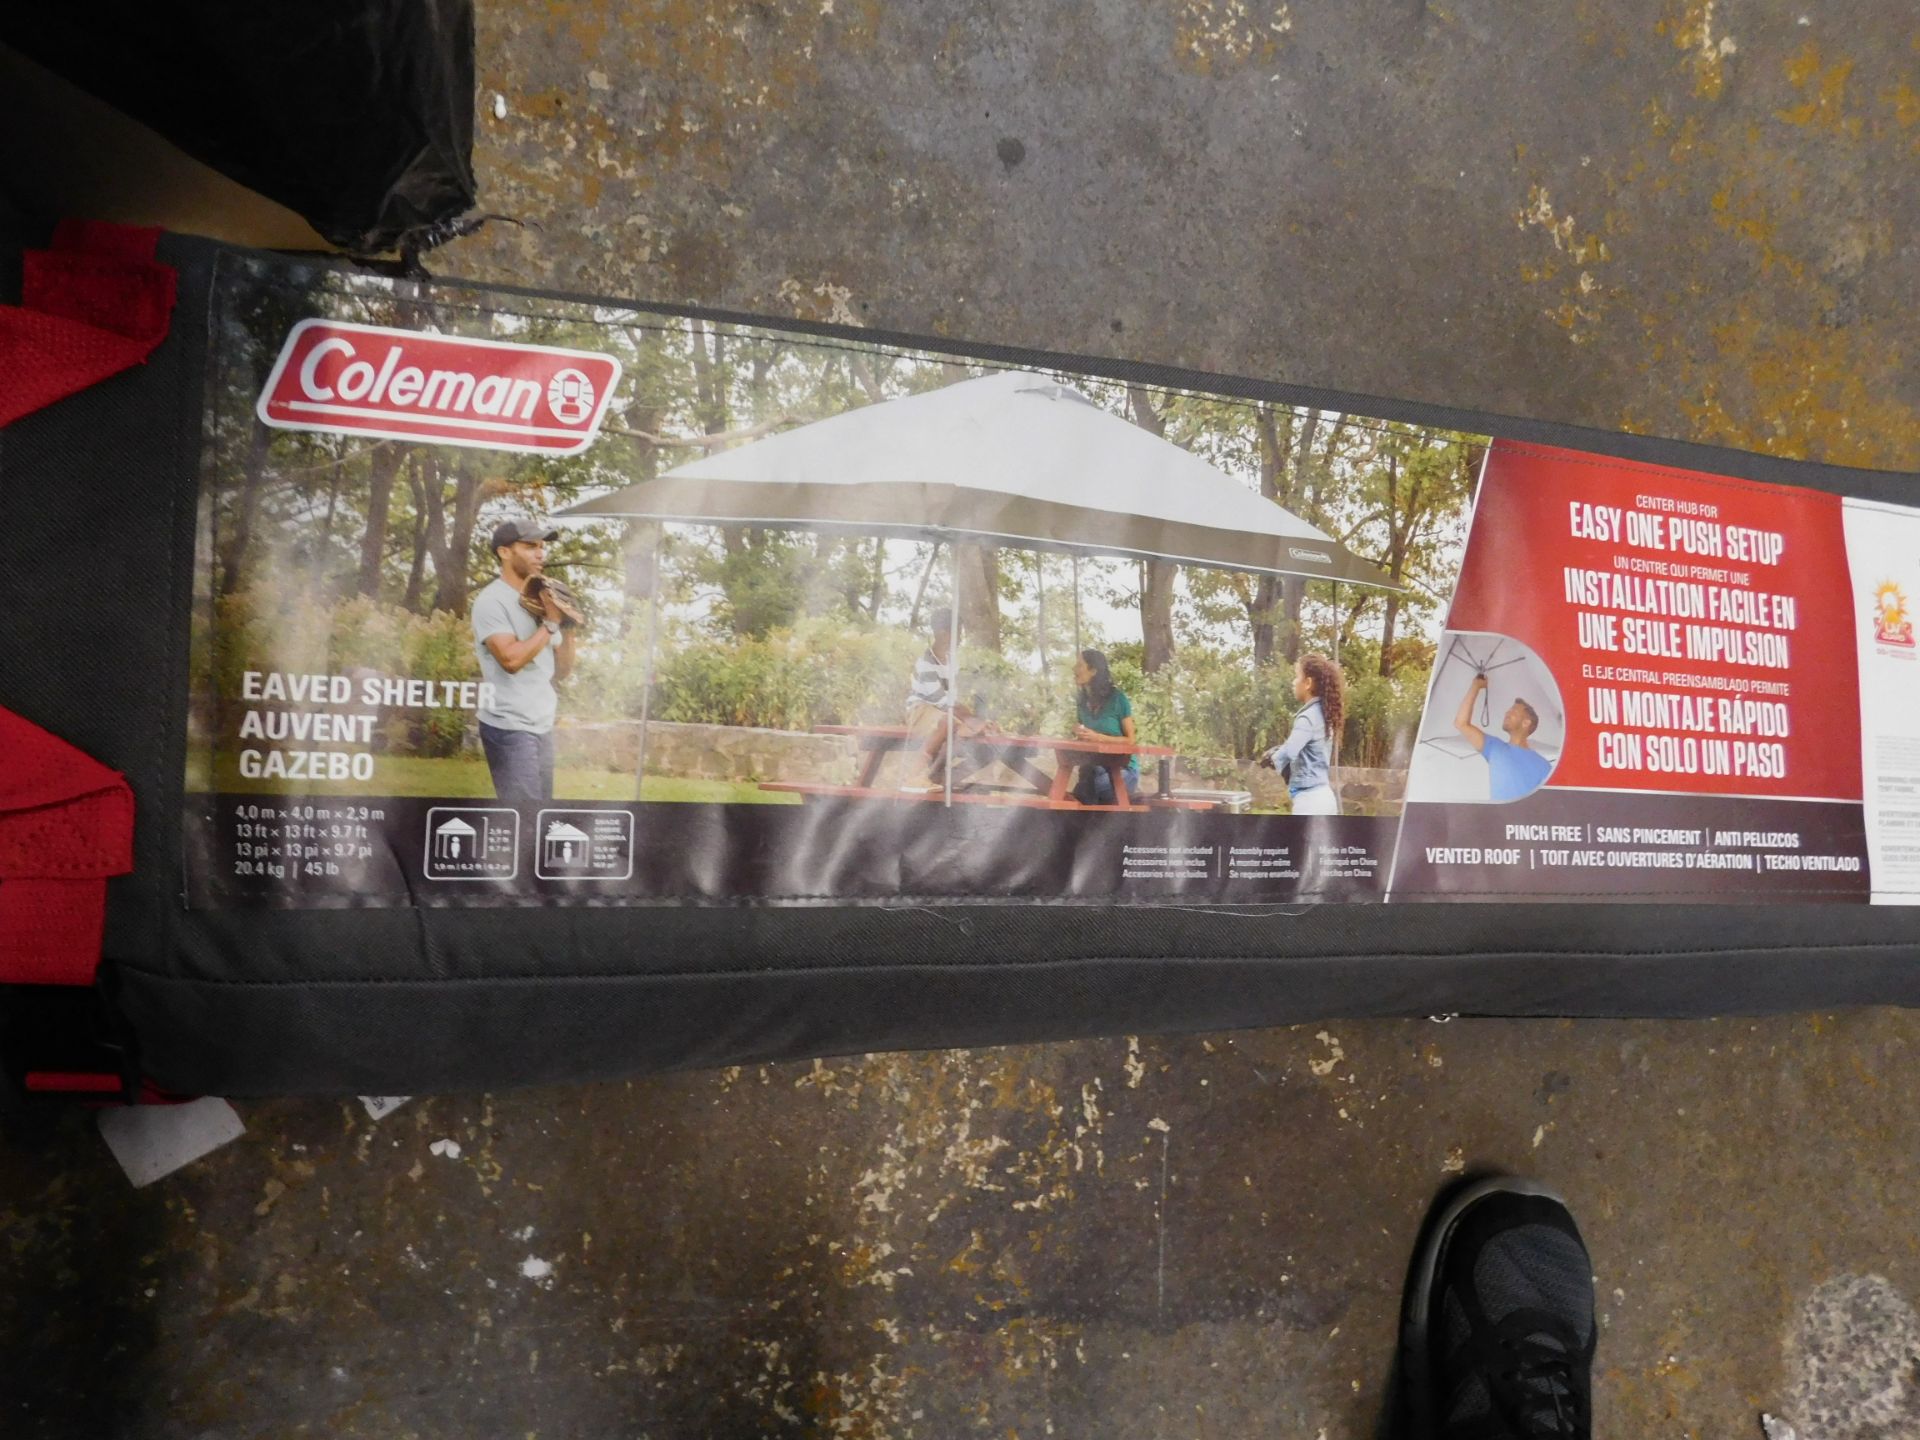 1 BAGGED COLEMAN 13 X 13FT (3.9 X 3.9M) INSTANT EAVED SHELTER RRP Â£199